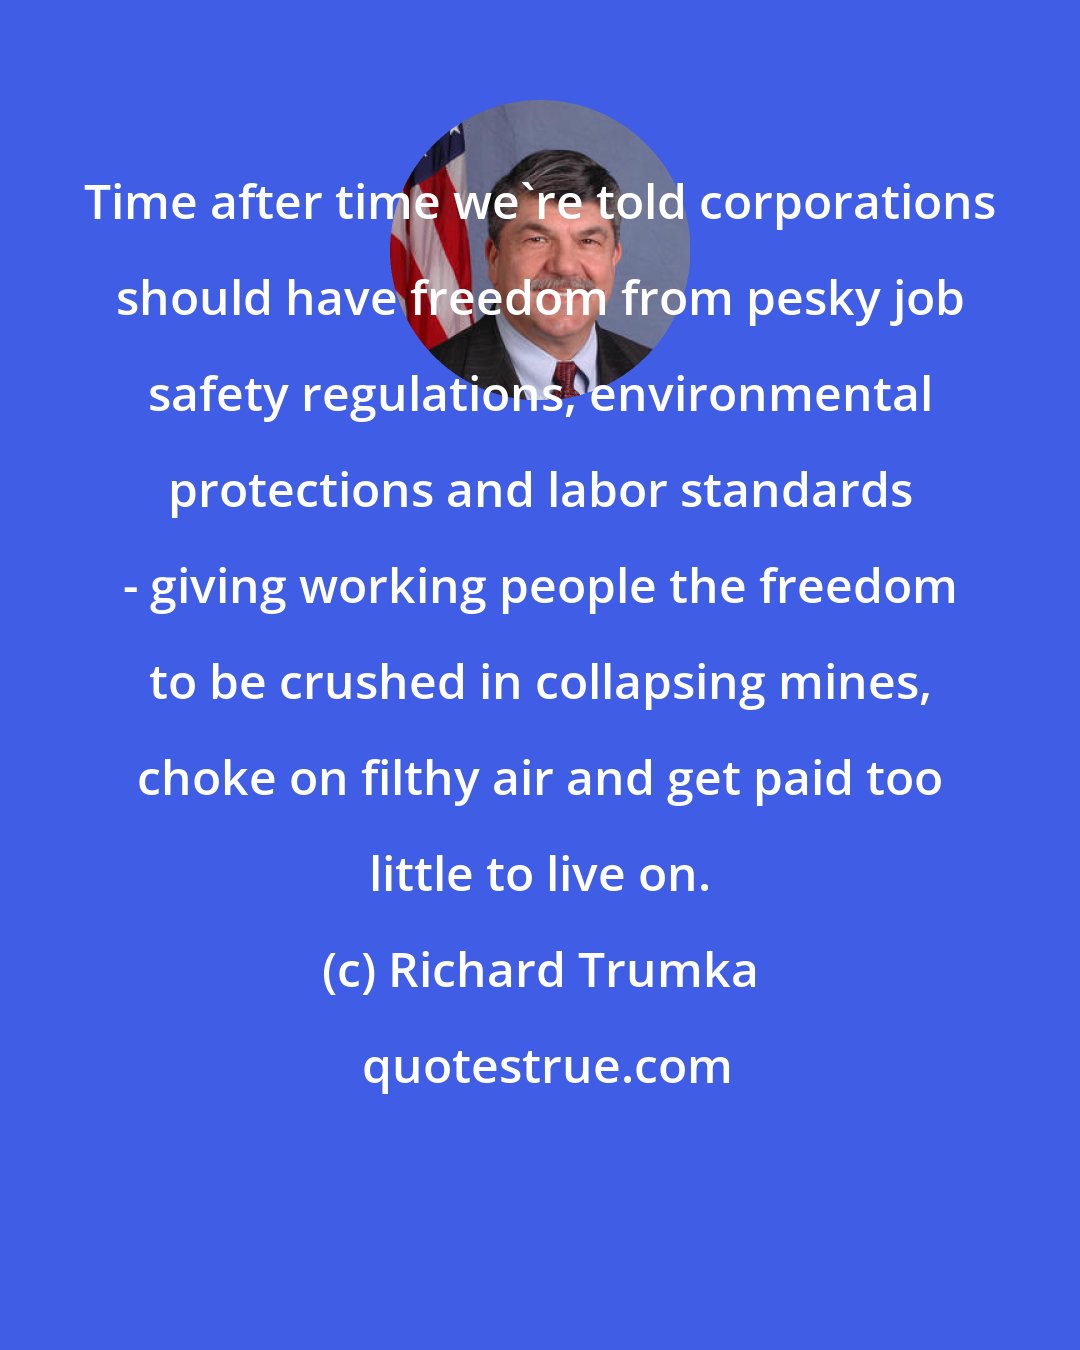 Richard Trumka: Time after time we're told corporations should have freedom from pesky job safety regulations, environmental protections and labor standards - giving working people the freedom to be crushed in collapsing mines, choke on filthy air and get paid too little to live on.